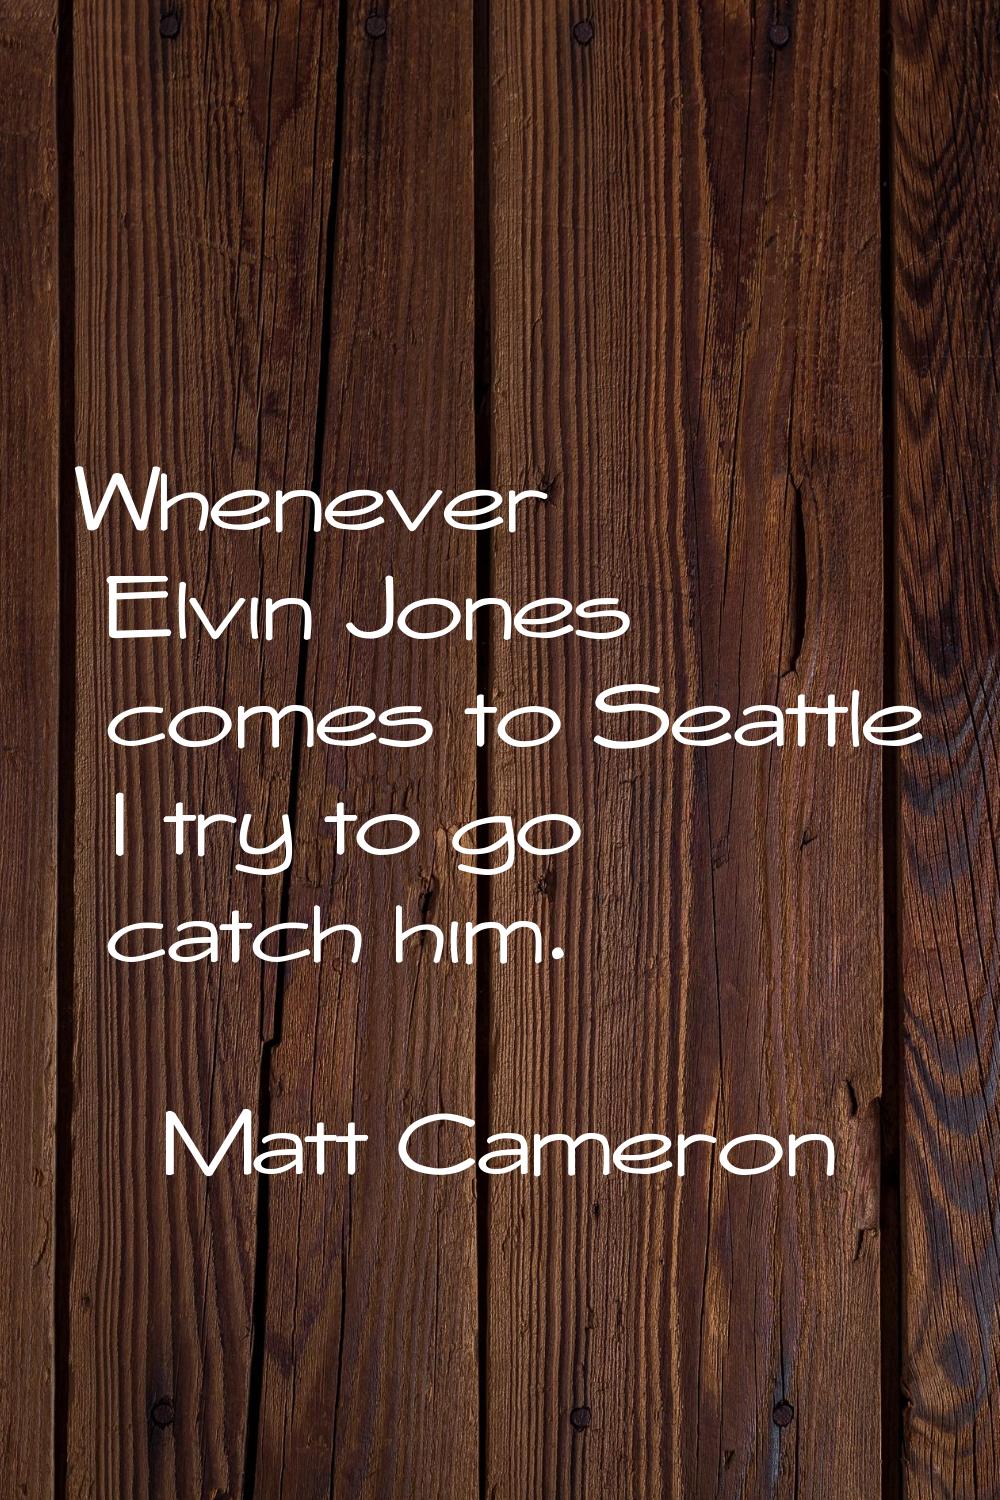 Whenever Elvin Jones comes to Seattle I try to go catch him.